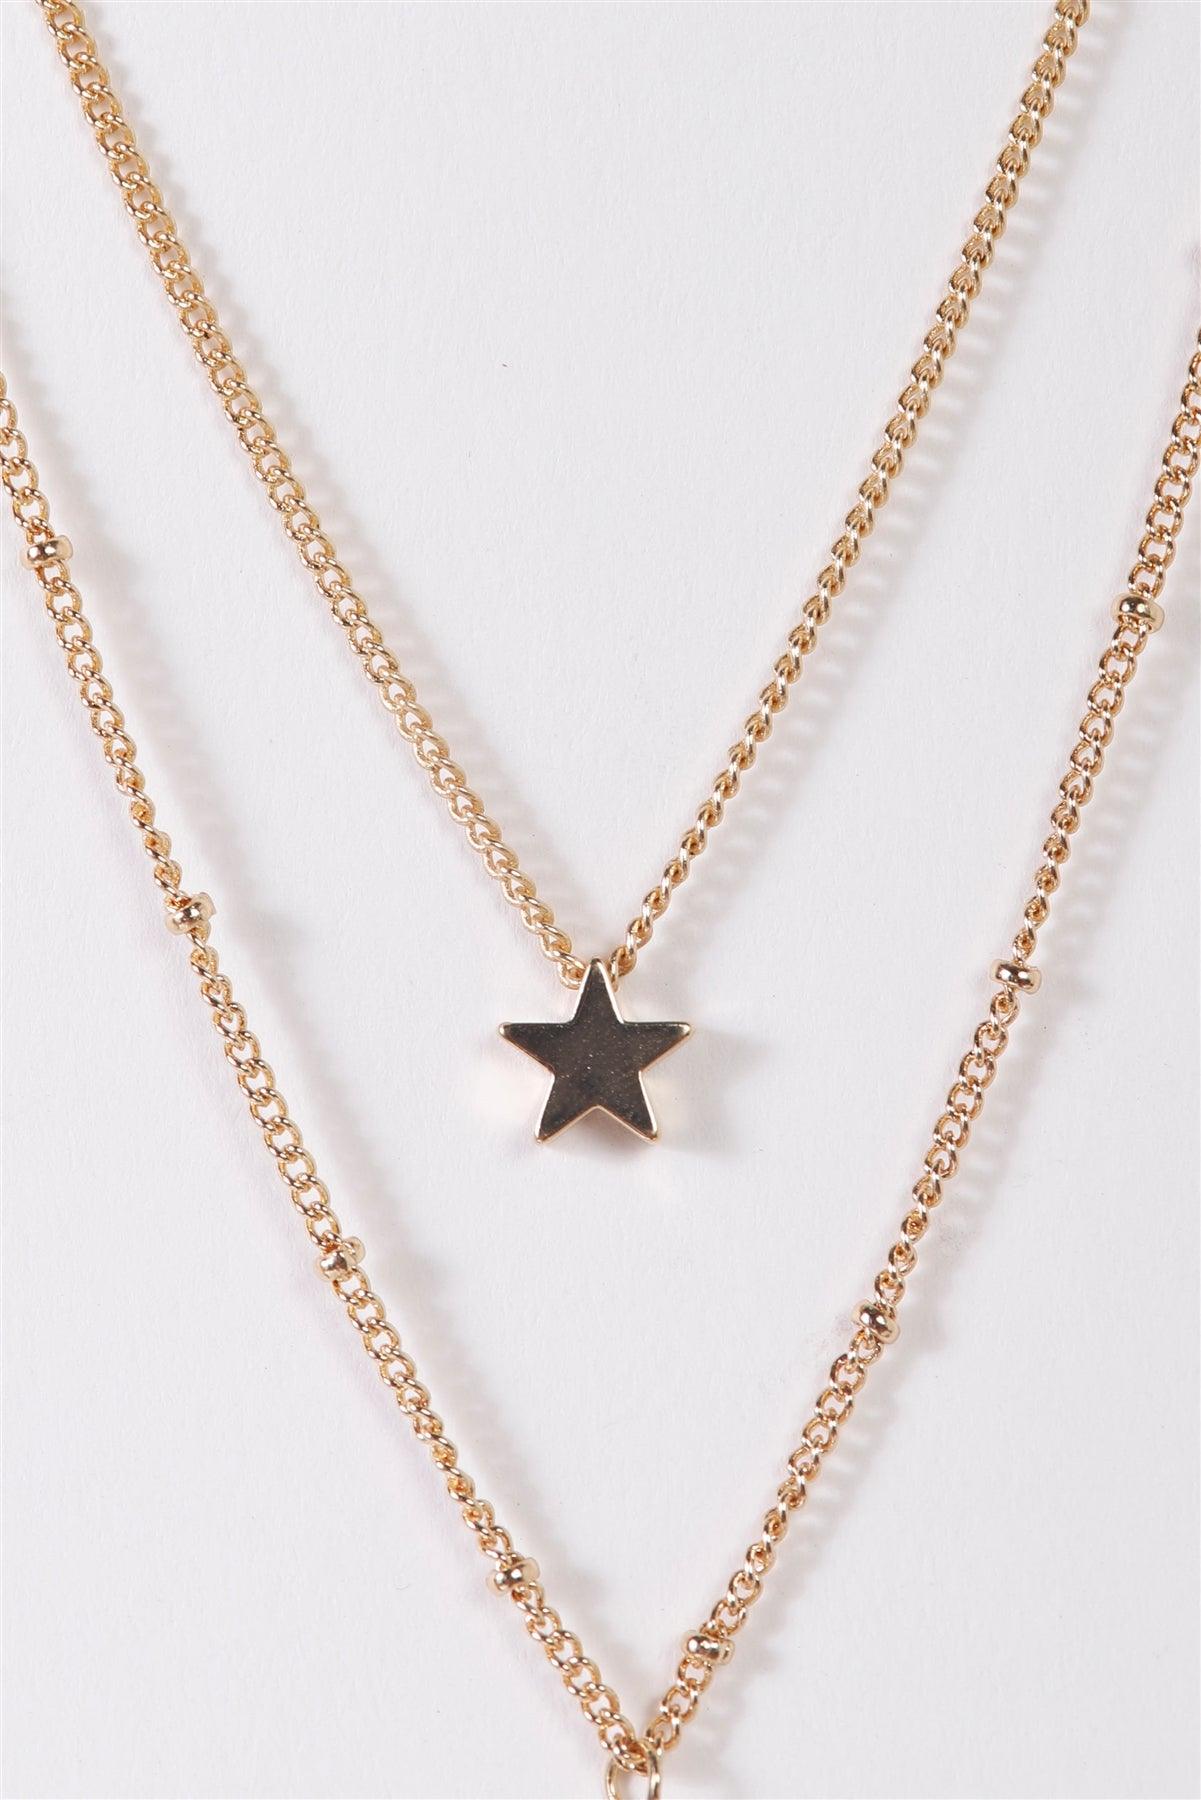 Gold Double Chain With Moon & Star Pendants Necklace /3 Pieces